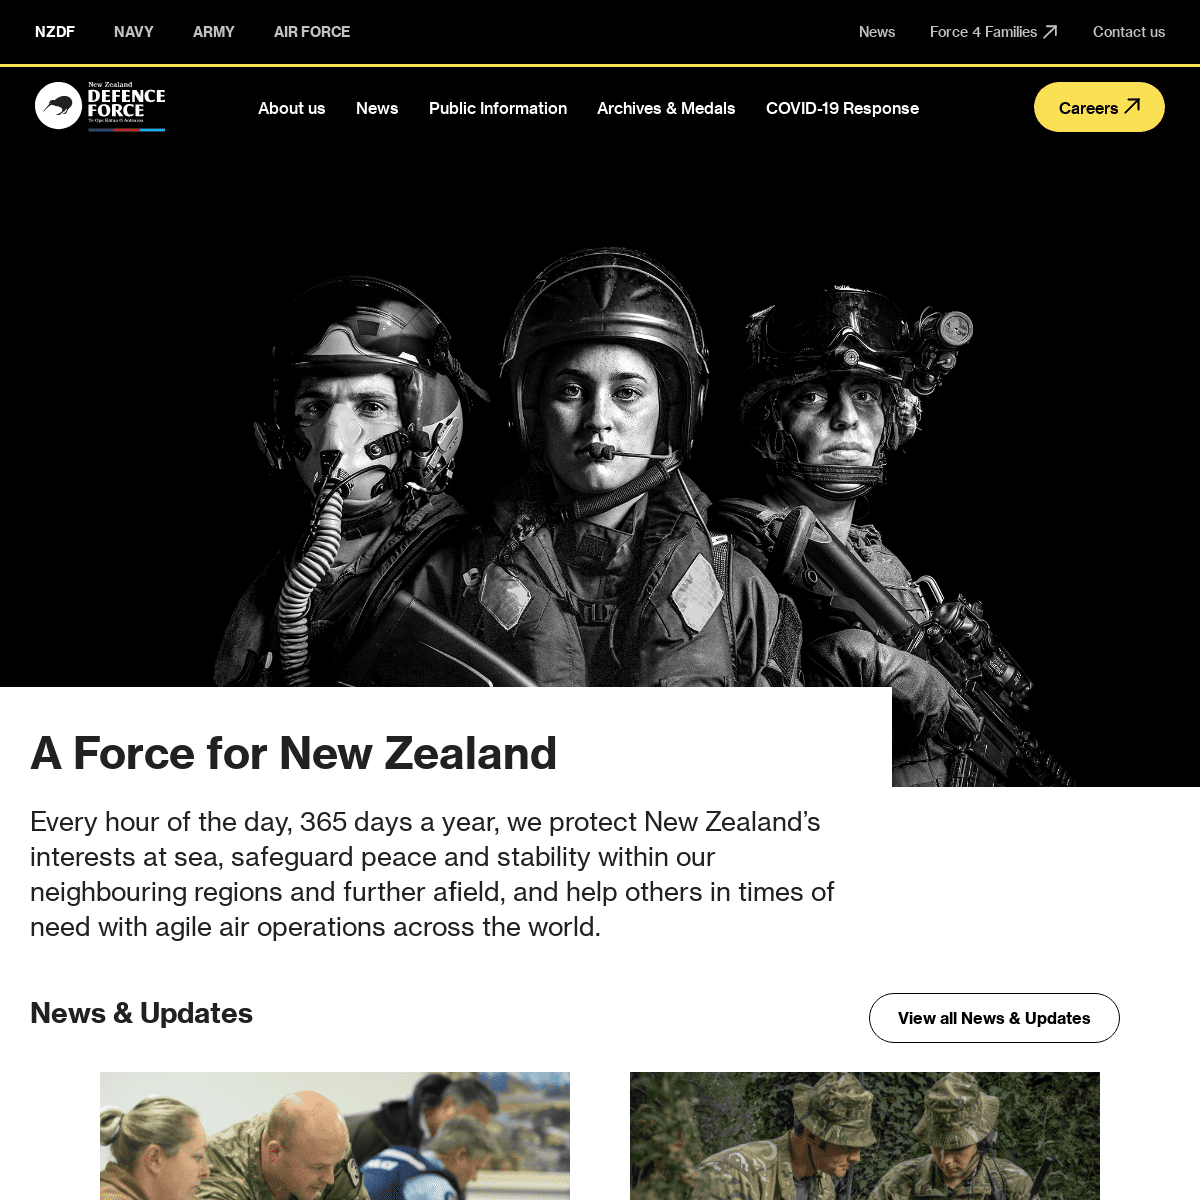 A complete backup of https://nzdf.mil.nz